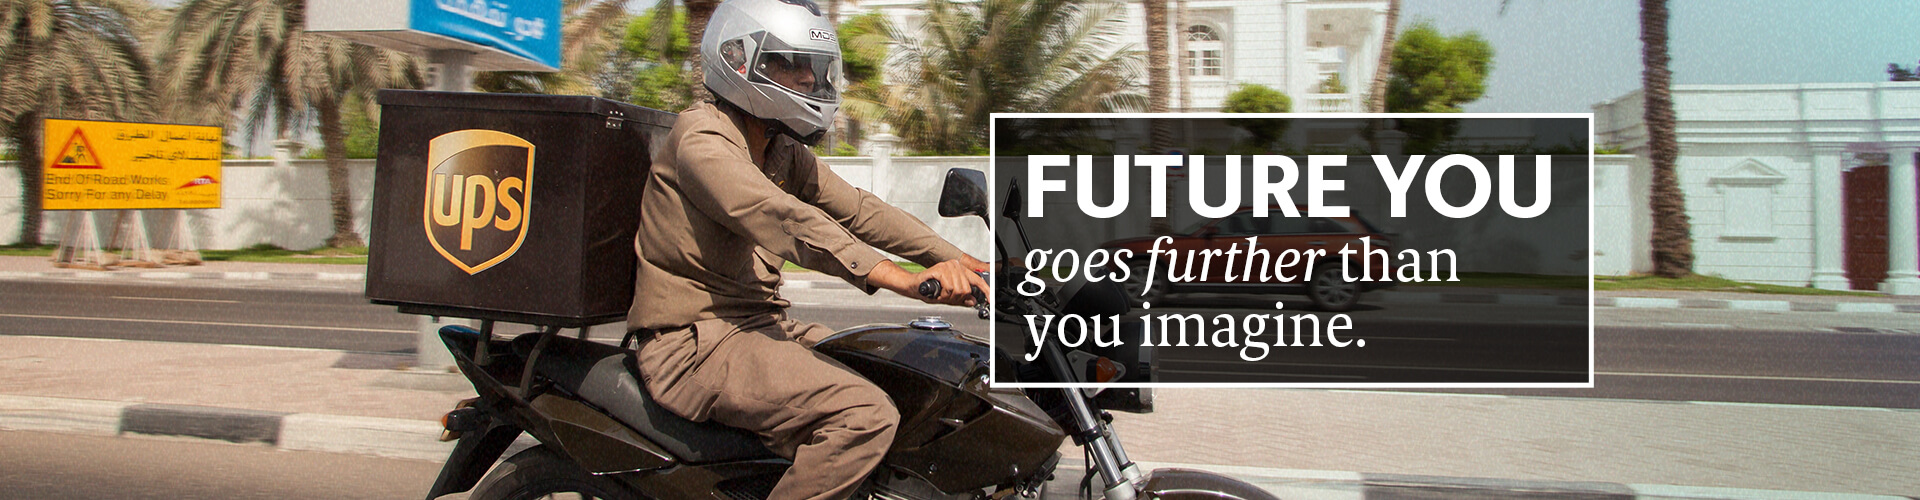 FUTURE YOU goes further than you imagine.